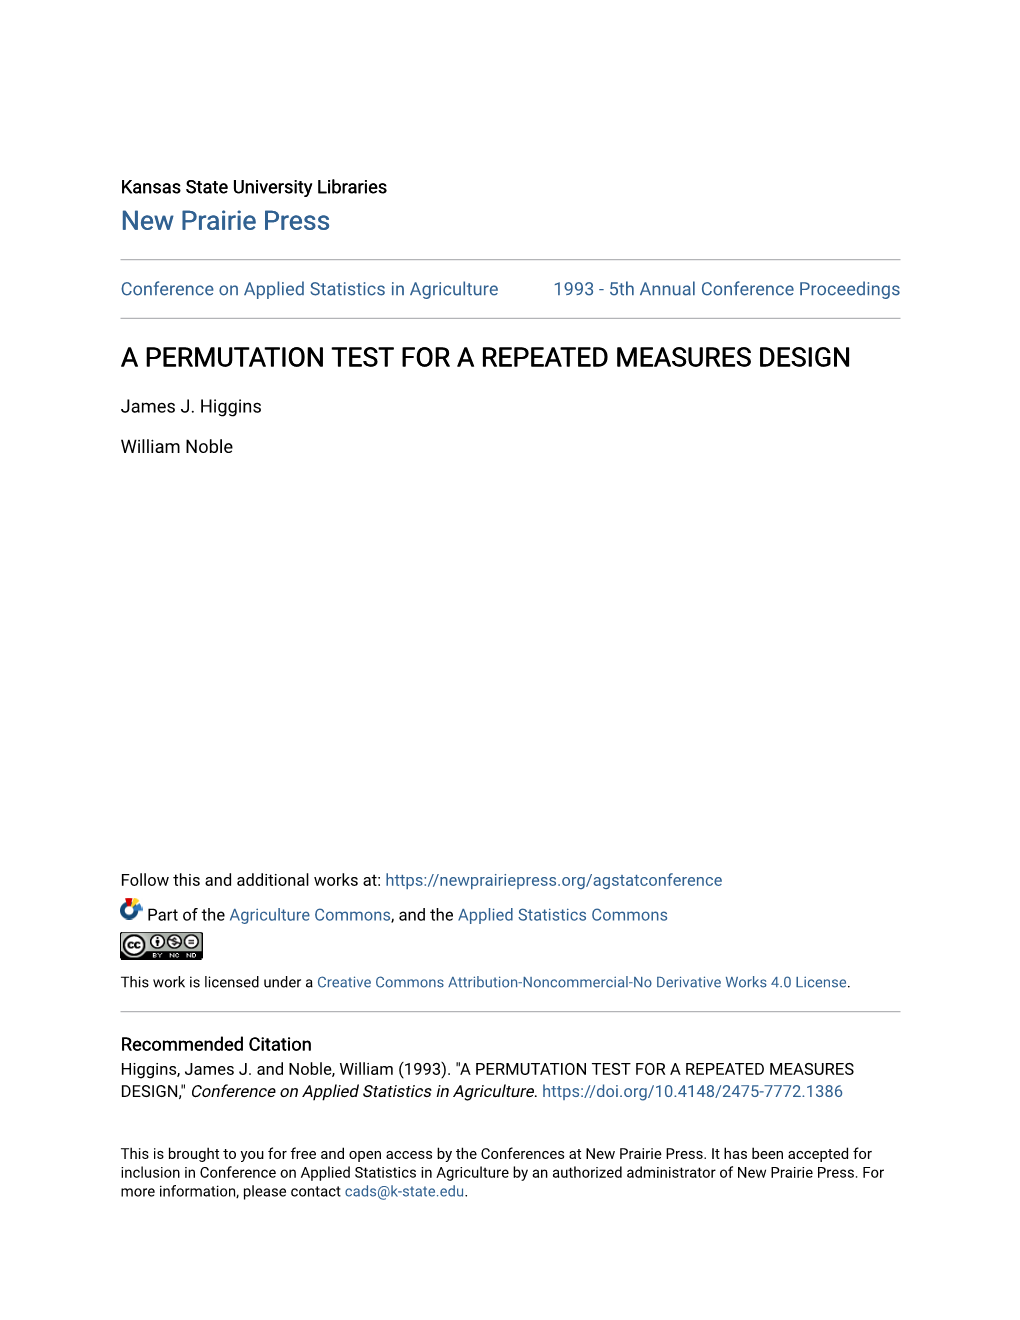 A Permutation Test for a Repeated Measures Design